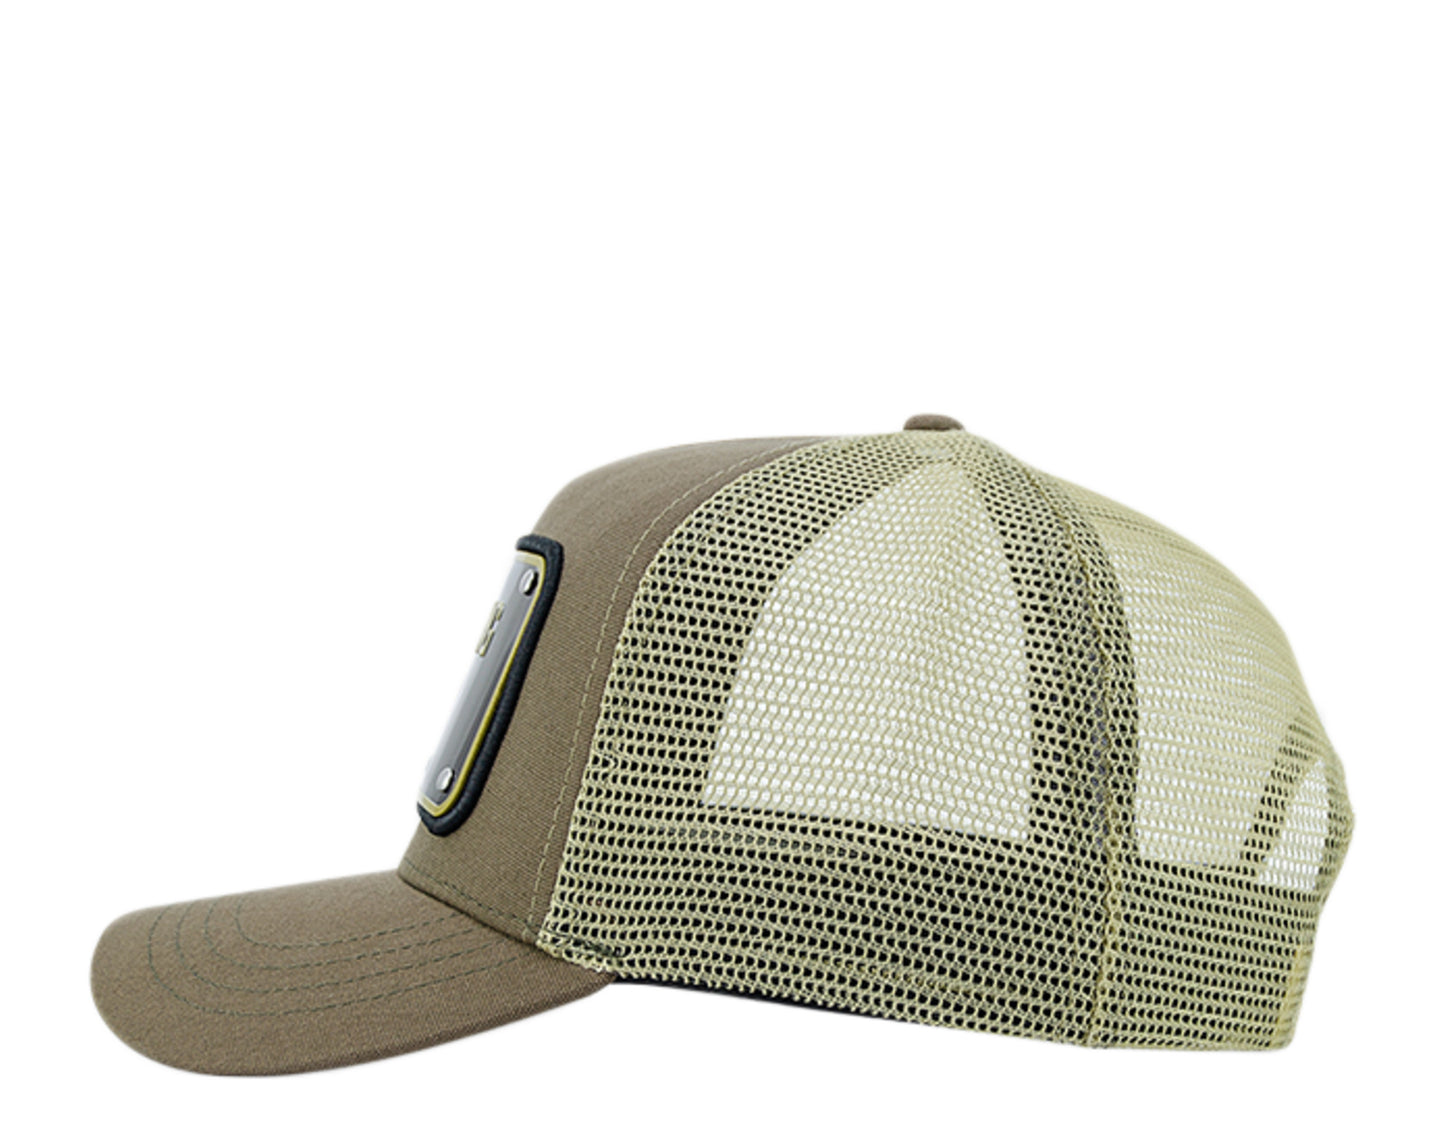 John Hatter & Co You Talking To Me Army/Olive/Black Trucker Hat 1021-ARMY